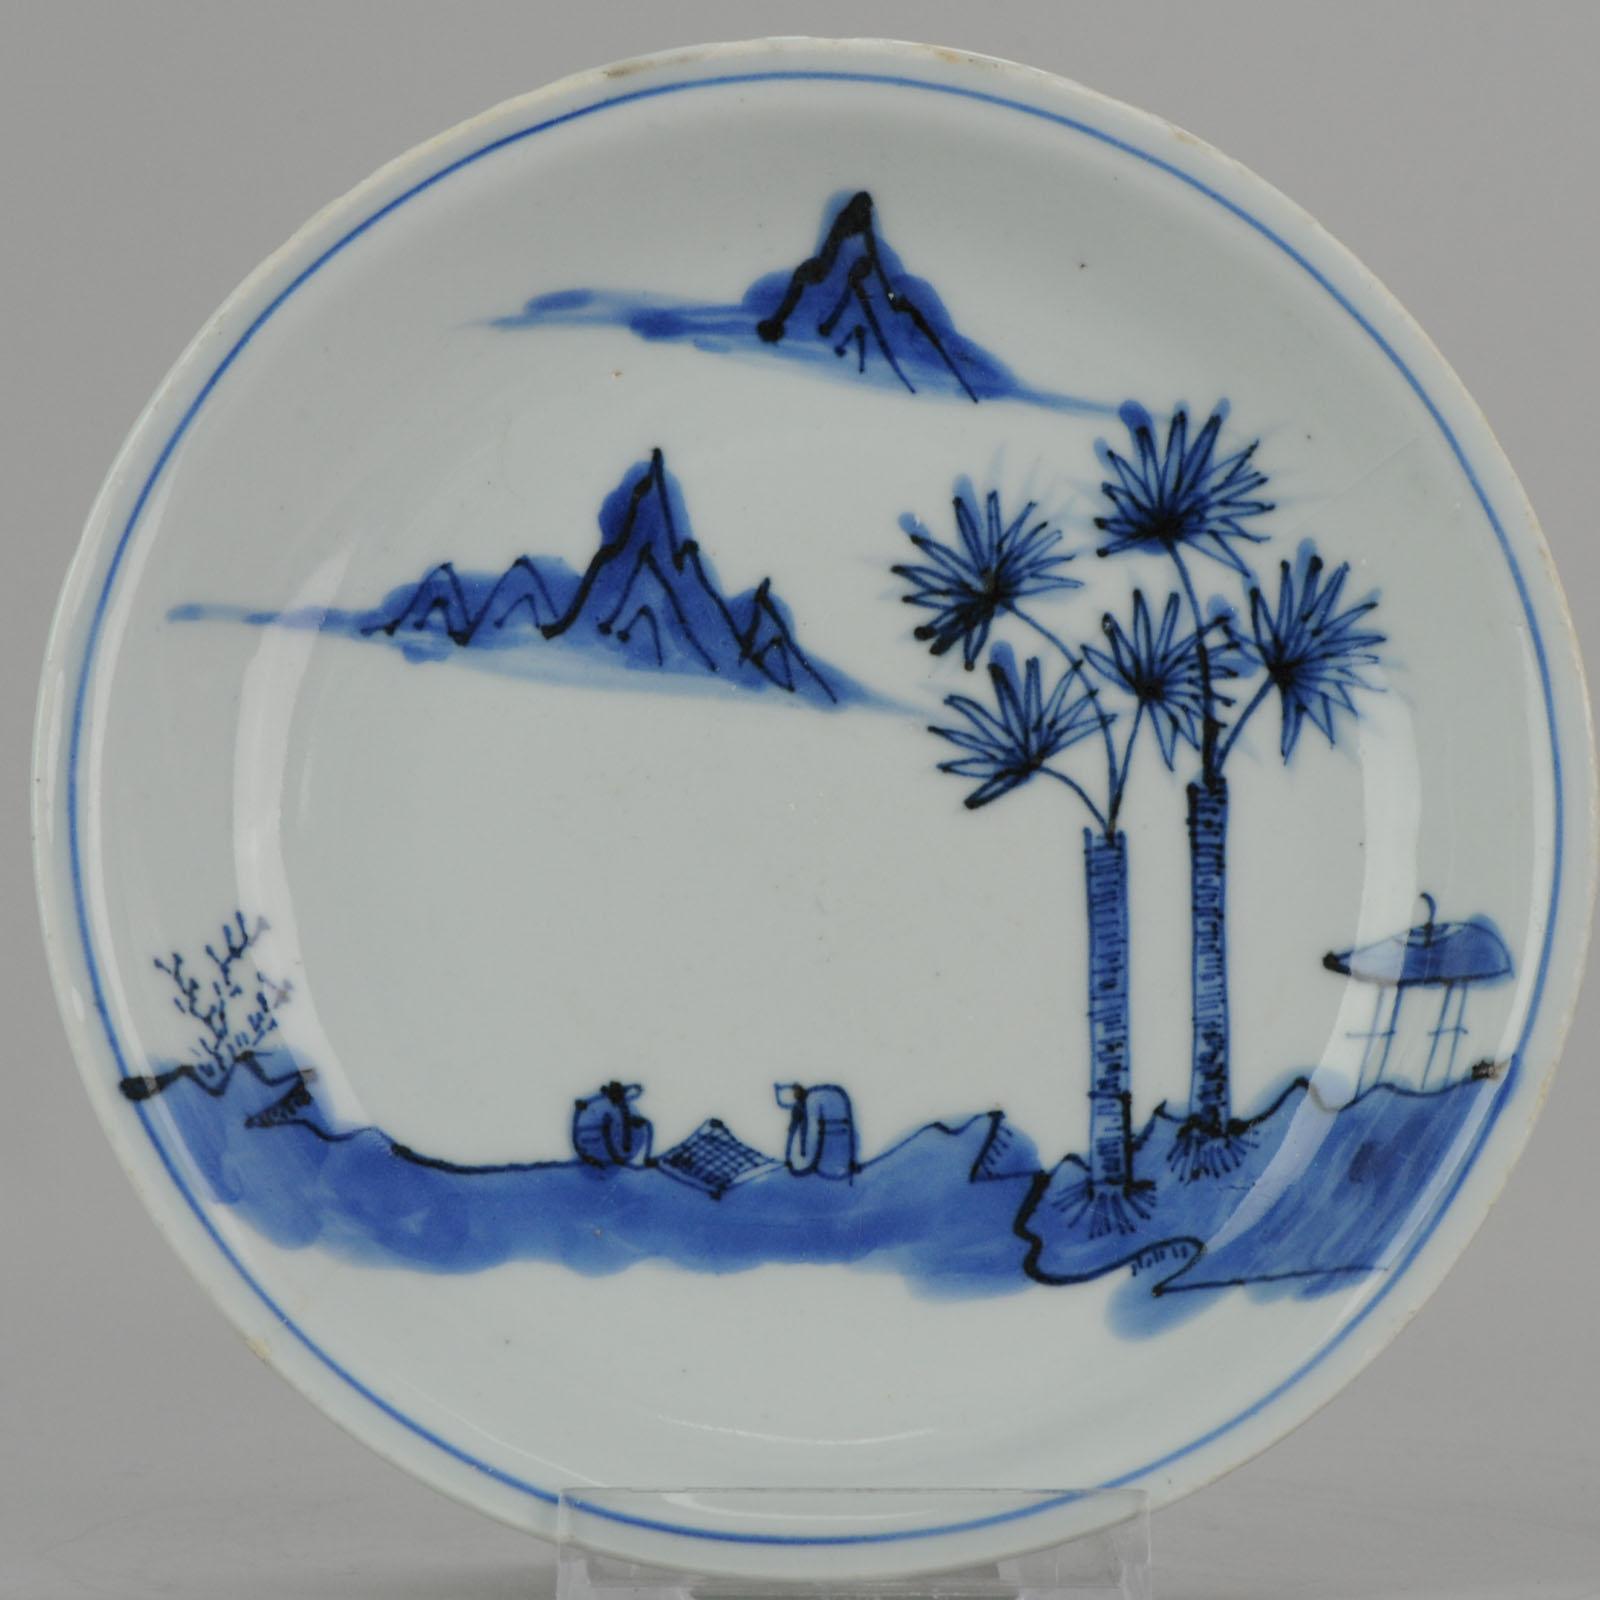 15-7-19-1-2

Typical late Ming landscape dish. A very nice example!

 
Condition
Overall condition A (Very good) rimfritting, filled chip and 2 hairlines. Size 160 mm

Period
16th century Ming (1368-1620).